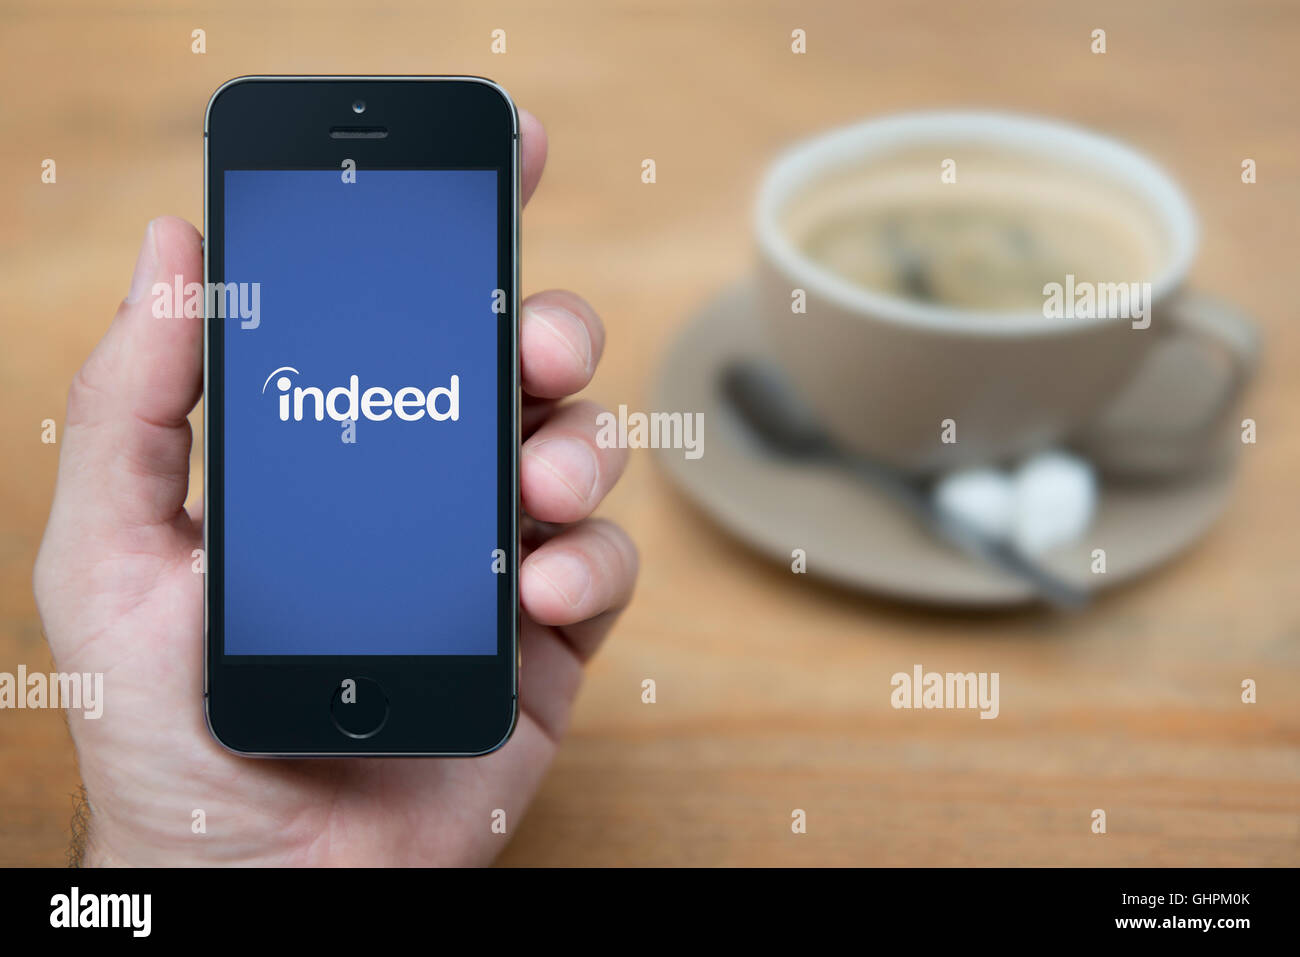 A man looks at his iPhone which displays the Indeed logo, while sat with a cup of coffee (Editorial use only). Stock Photo